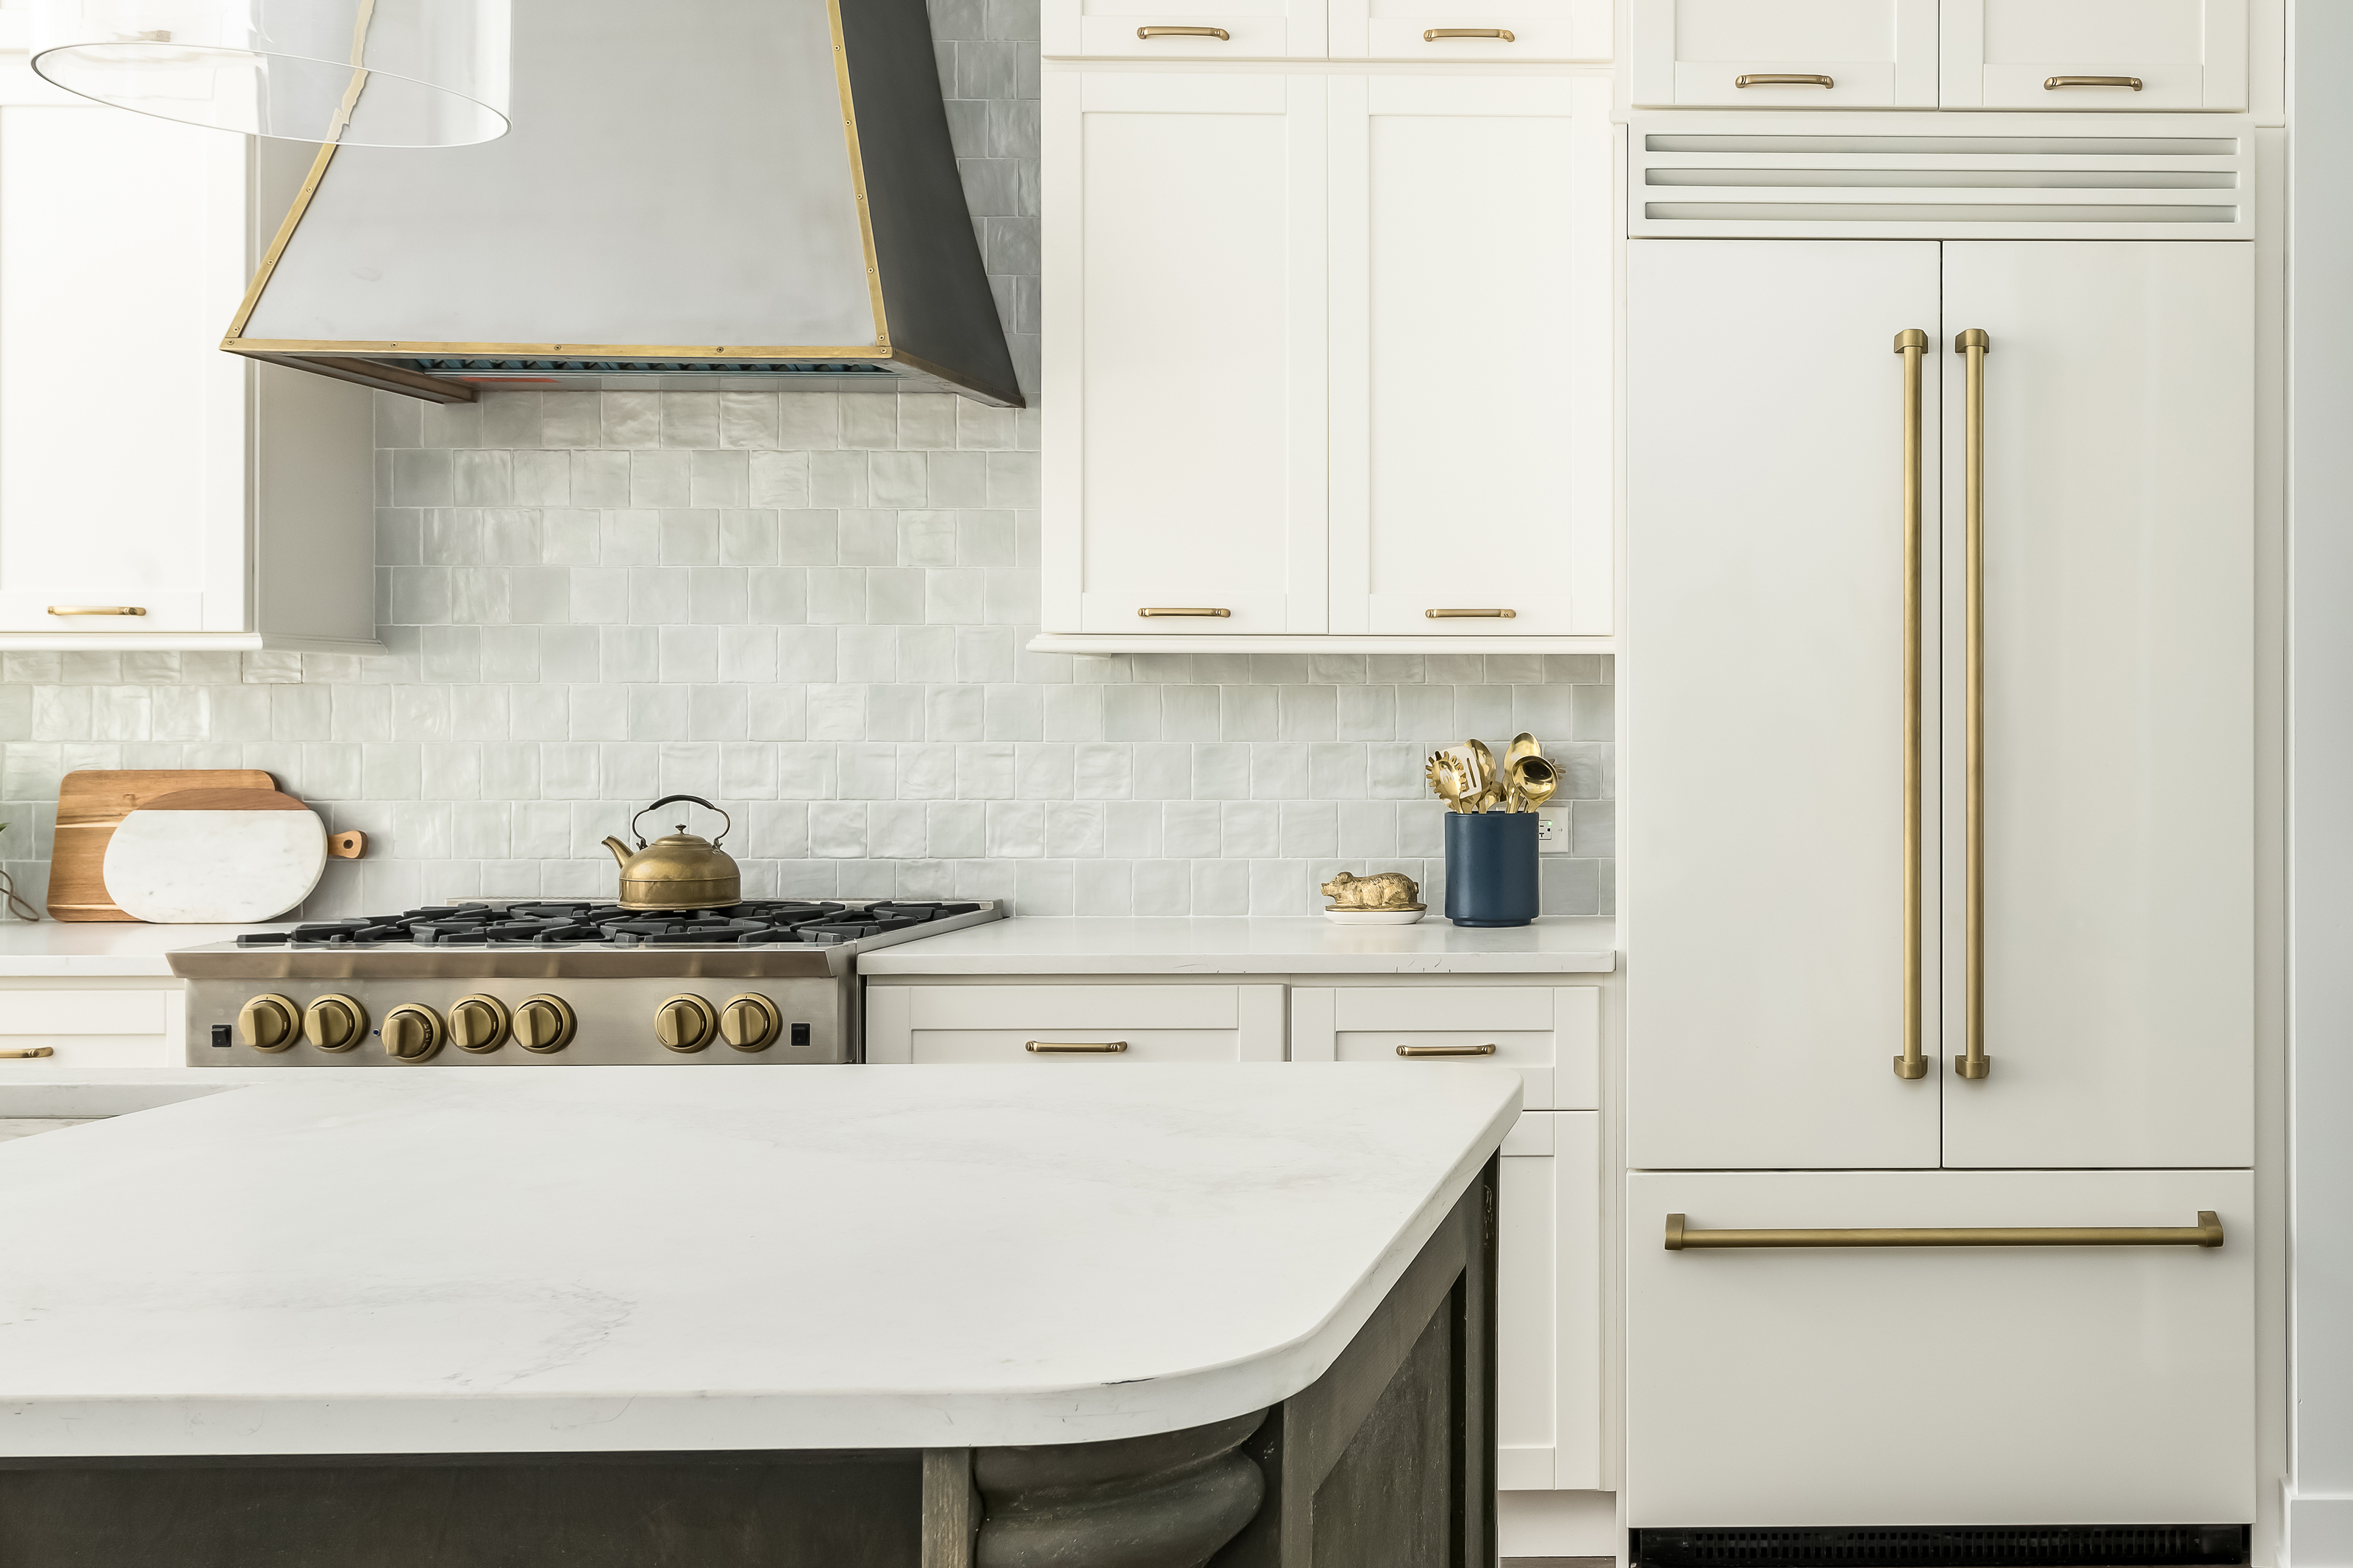 4 Small Appliance Colour Trends to Brighten Up Your Kitchen